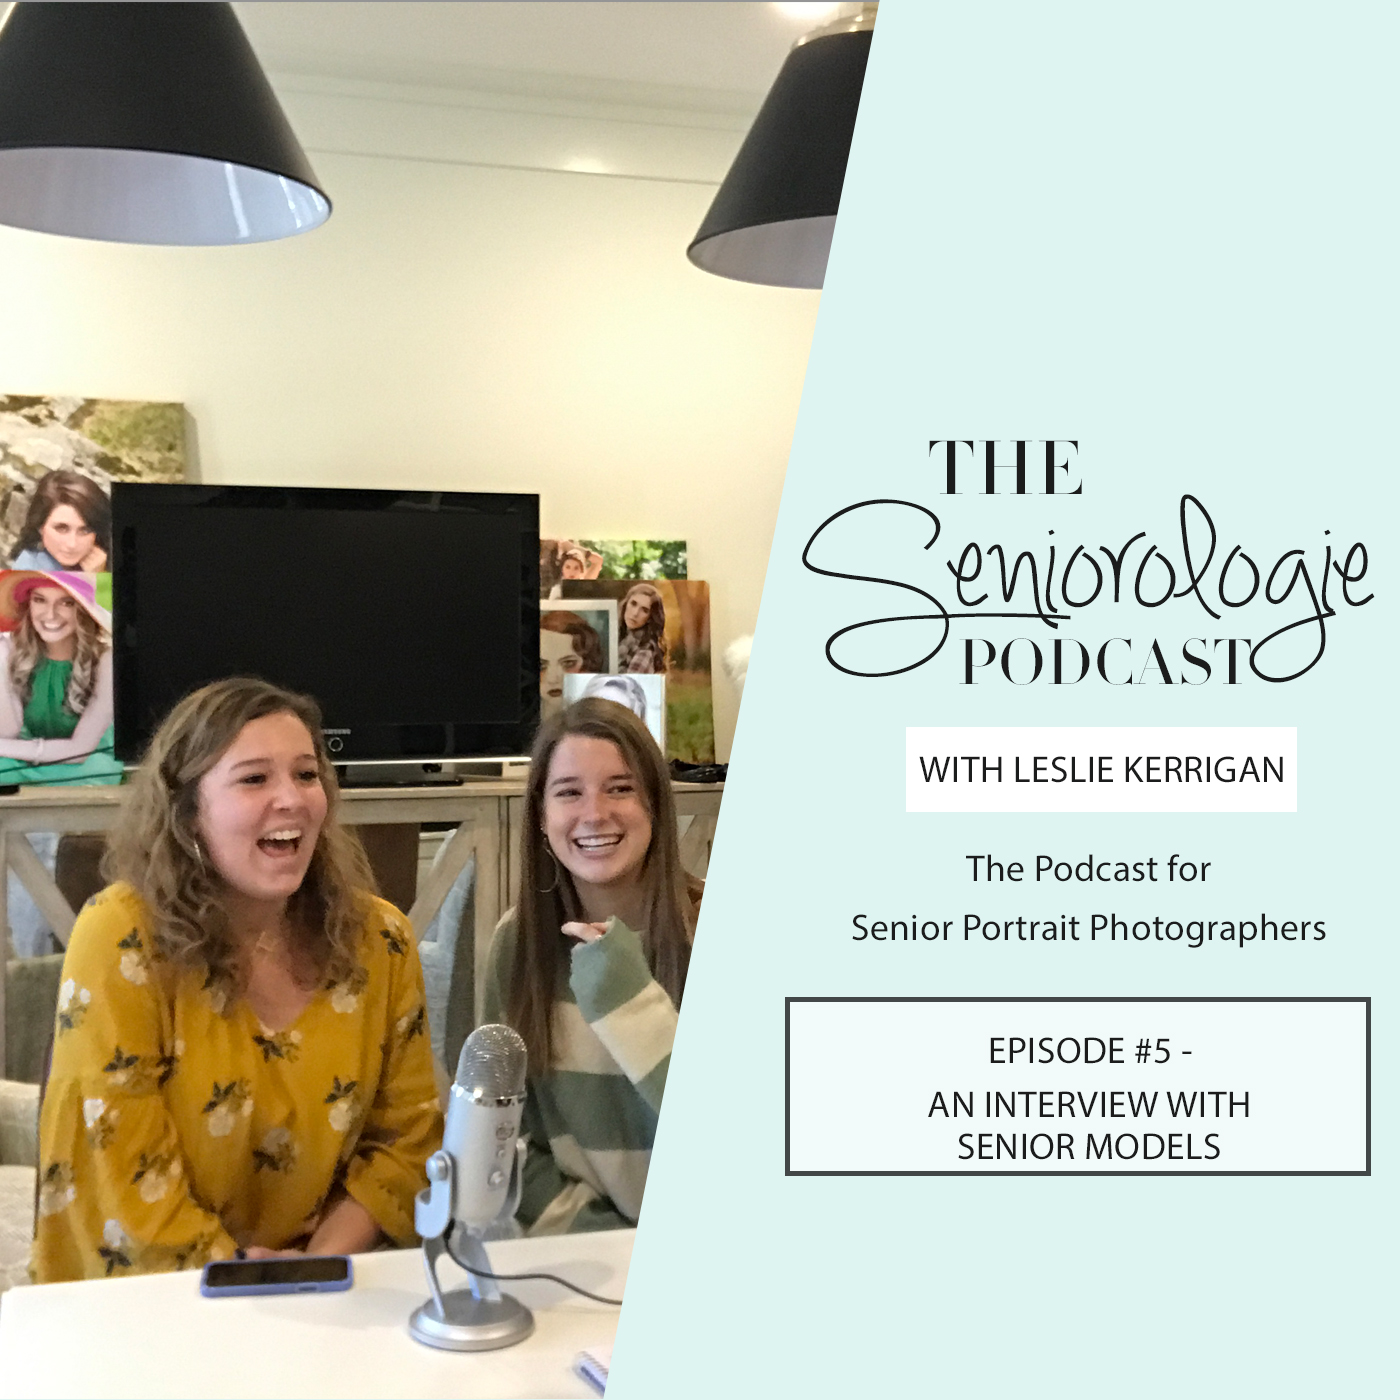 An interview with senior models: My senior spokesmodels chat on the Seniorologie podcast about their experience on the LKP team